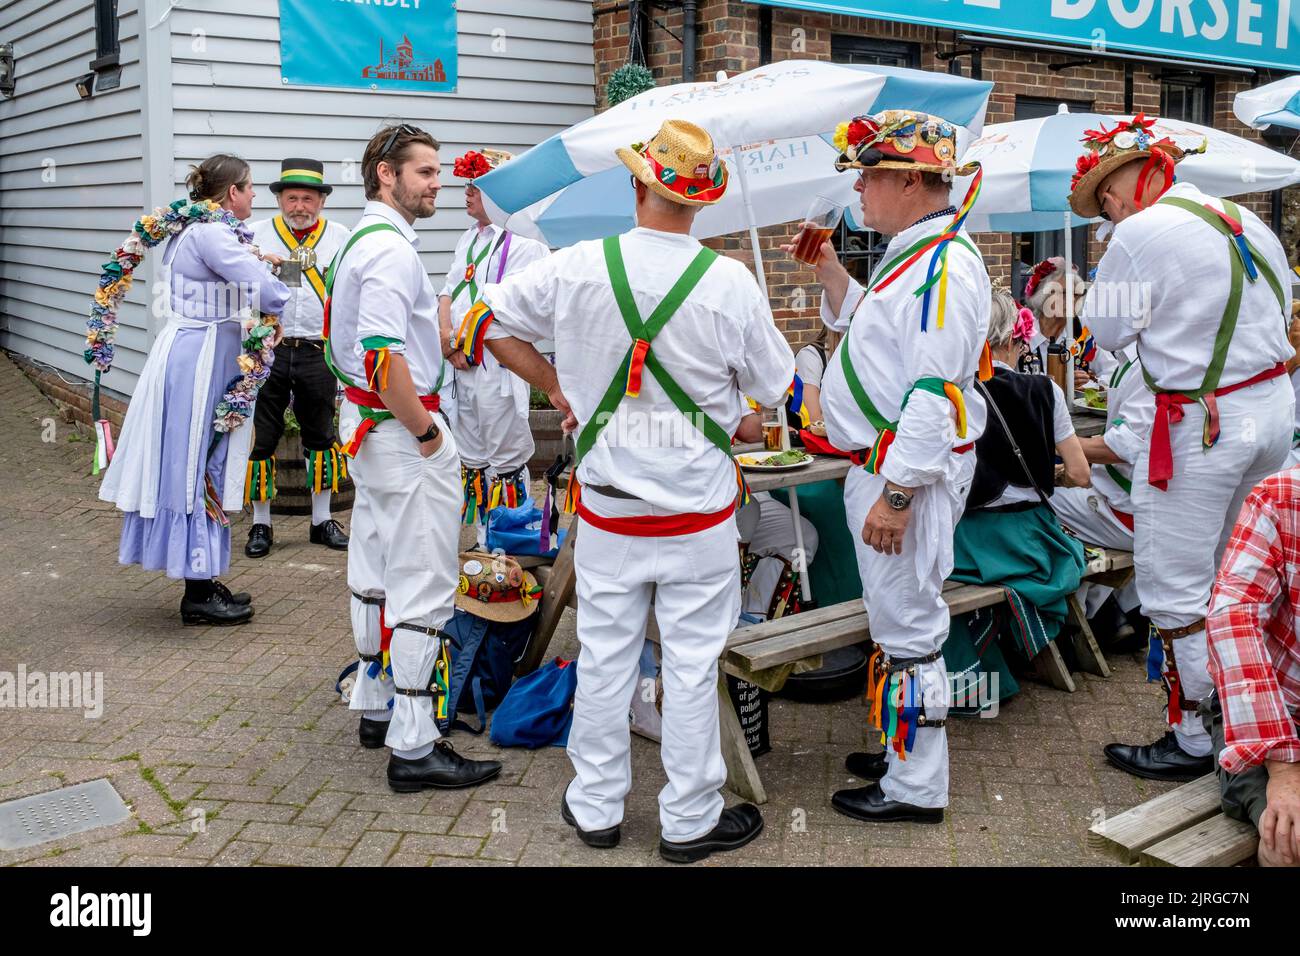 A Group Of Morris Dancers Socialising Outside The Dorset Pub, Lewes, East Sussex, UK. Stock Photo